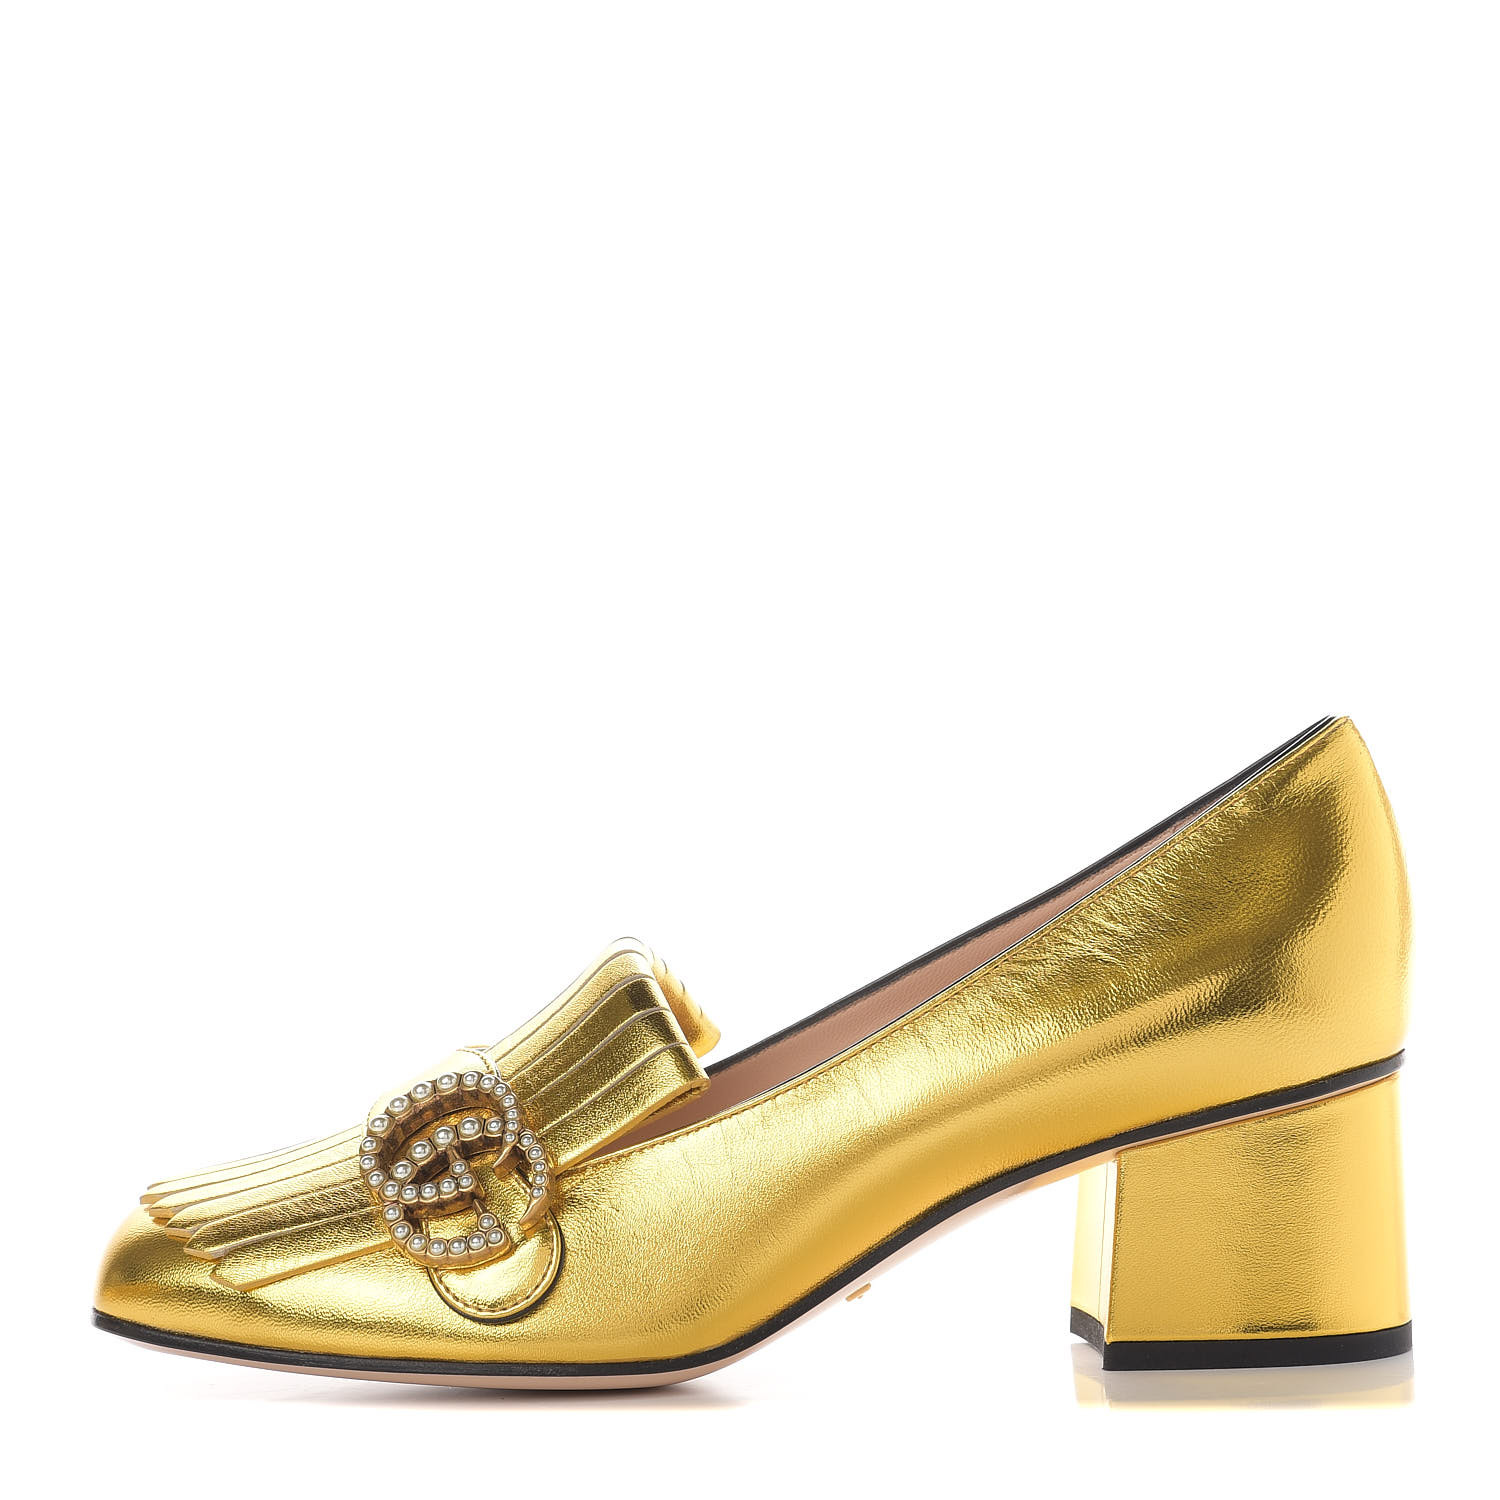 GUCCI Metallic Pearl Marmont Fringe Loafer Pumps 37.5 Gold 607156